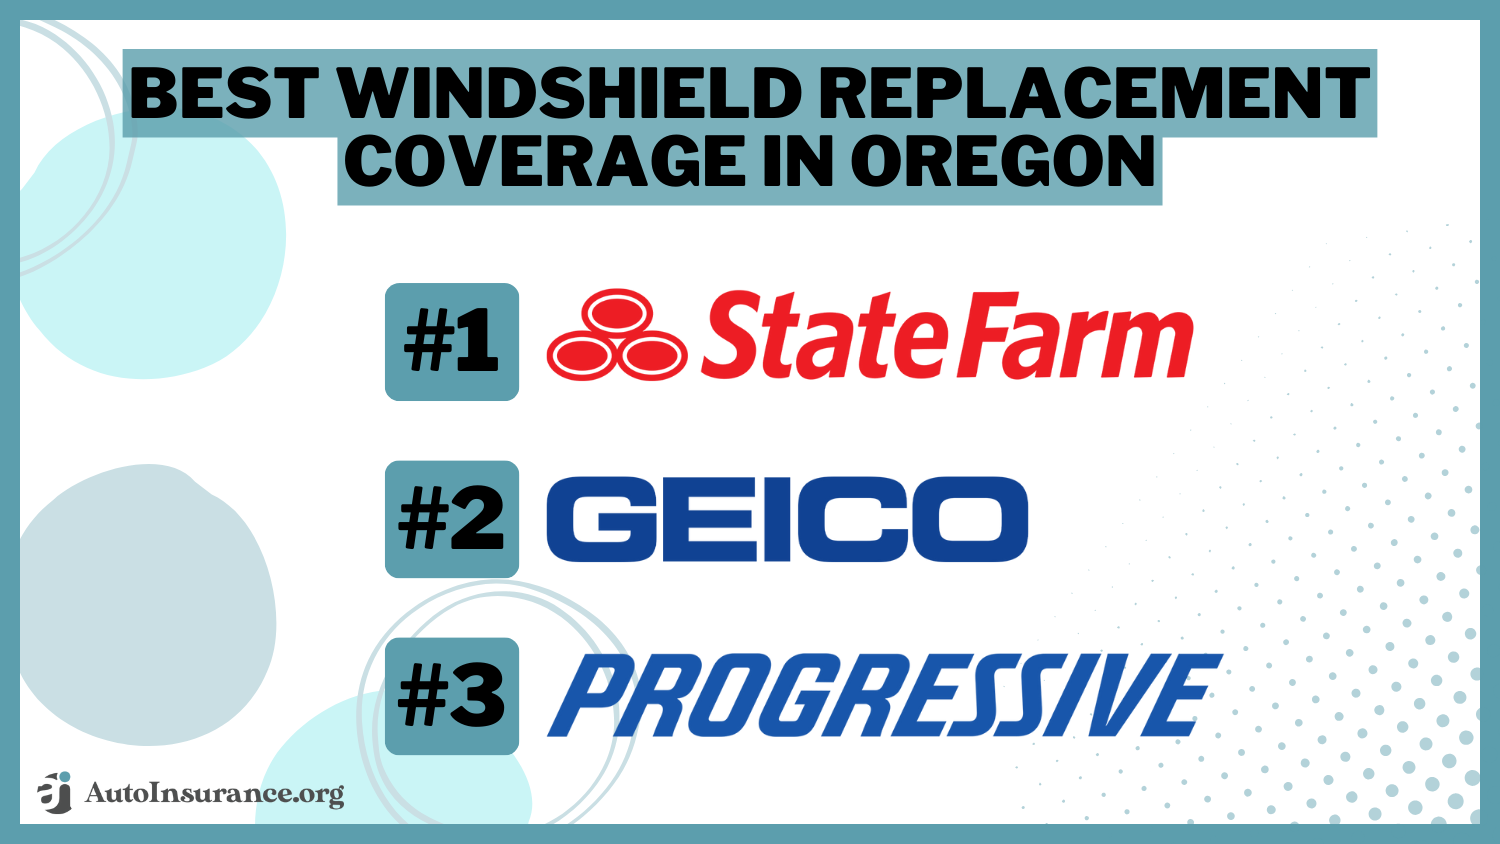 Best Windshield Replacement Coverage in Oregon: State Farm, Geico, and Progressive